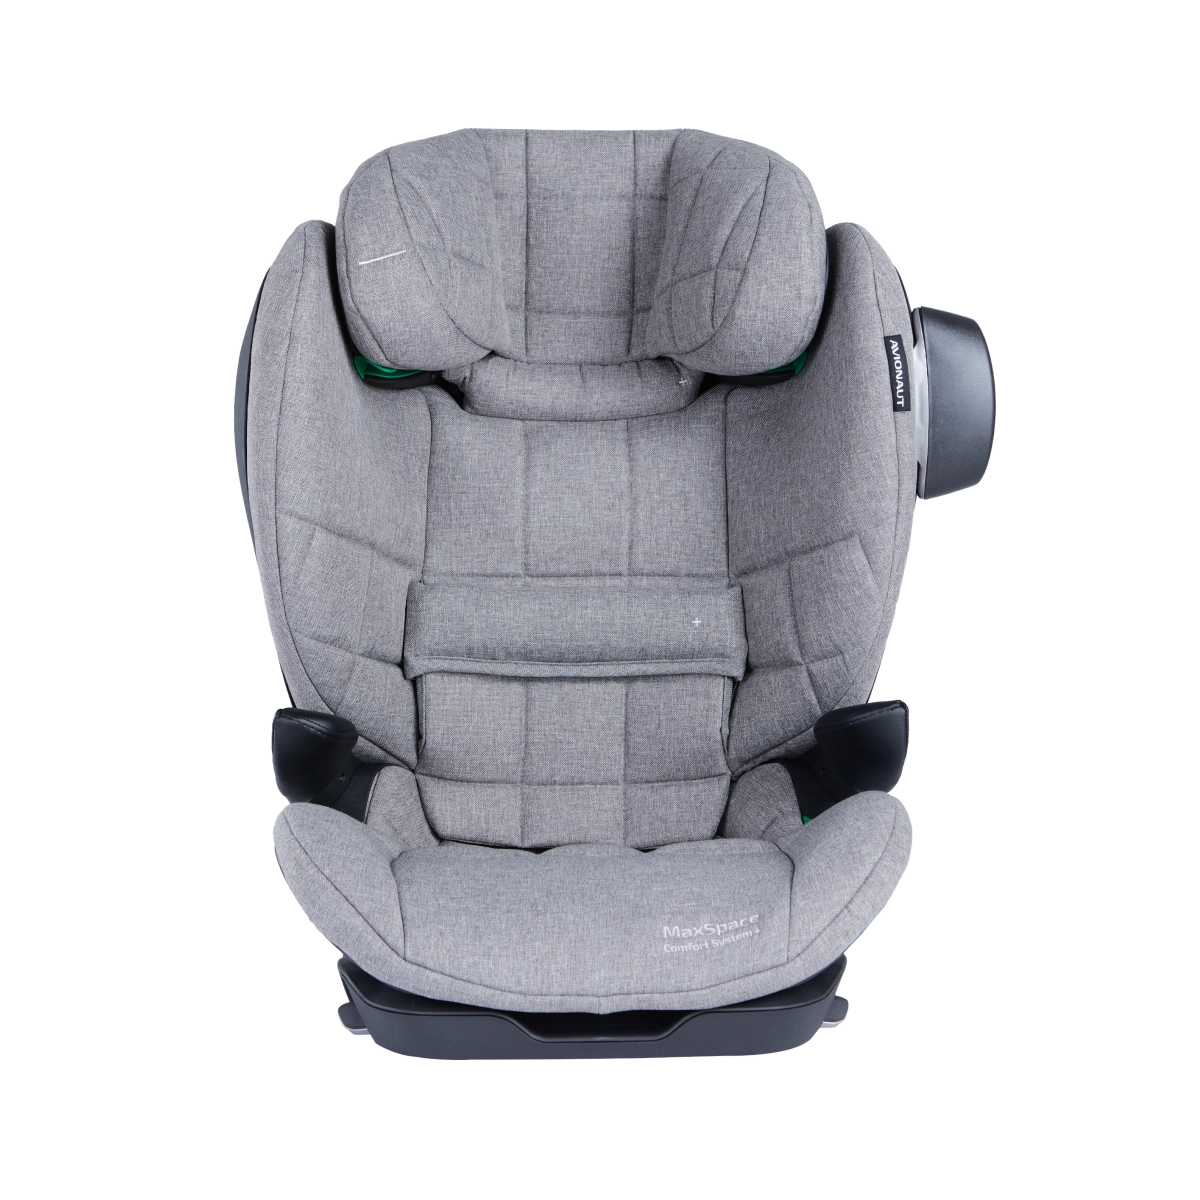 Avionaut MaxSpace Comfort System+ Group 2/3 Car Seat in Grey